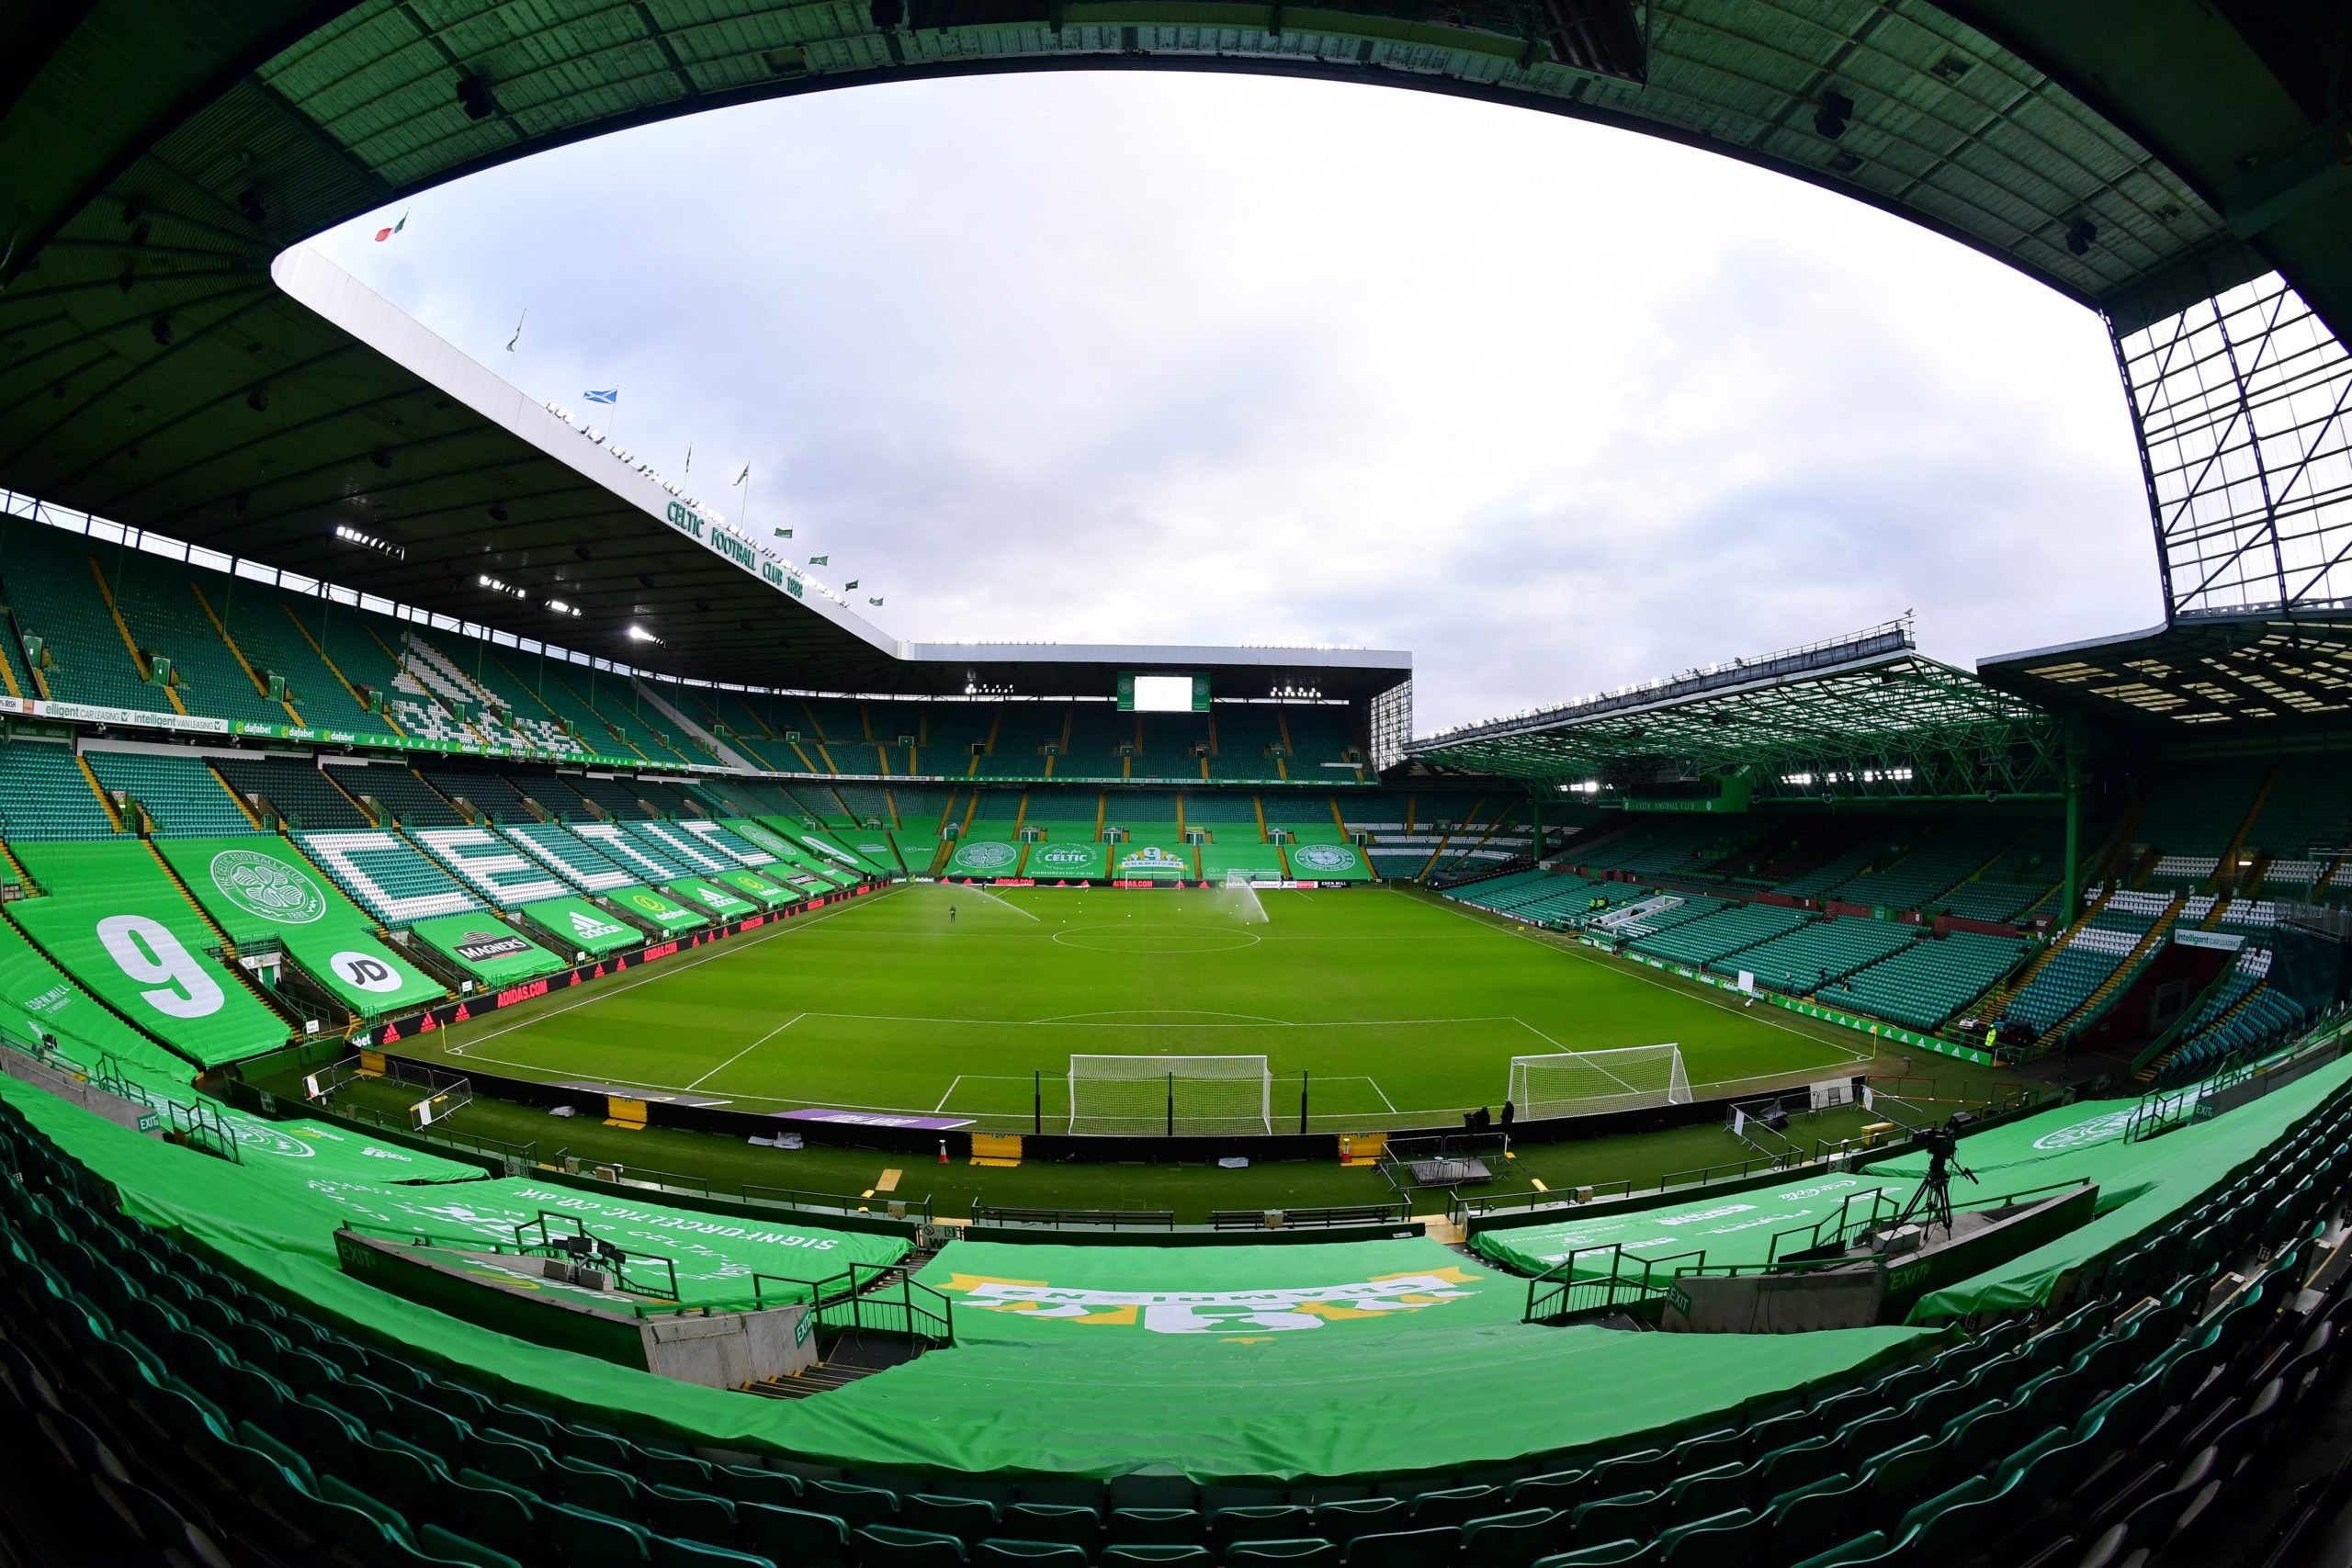 Celtic head of recruitment has left the building claims journalist